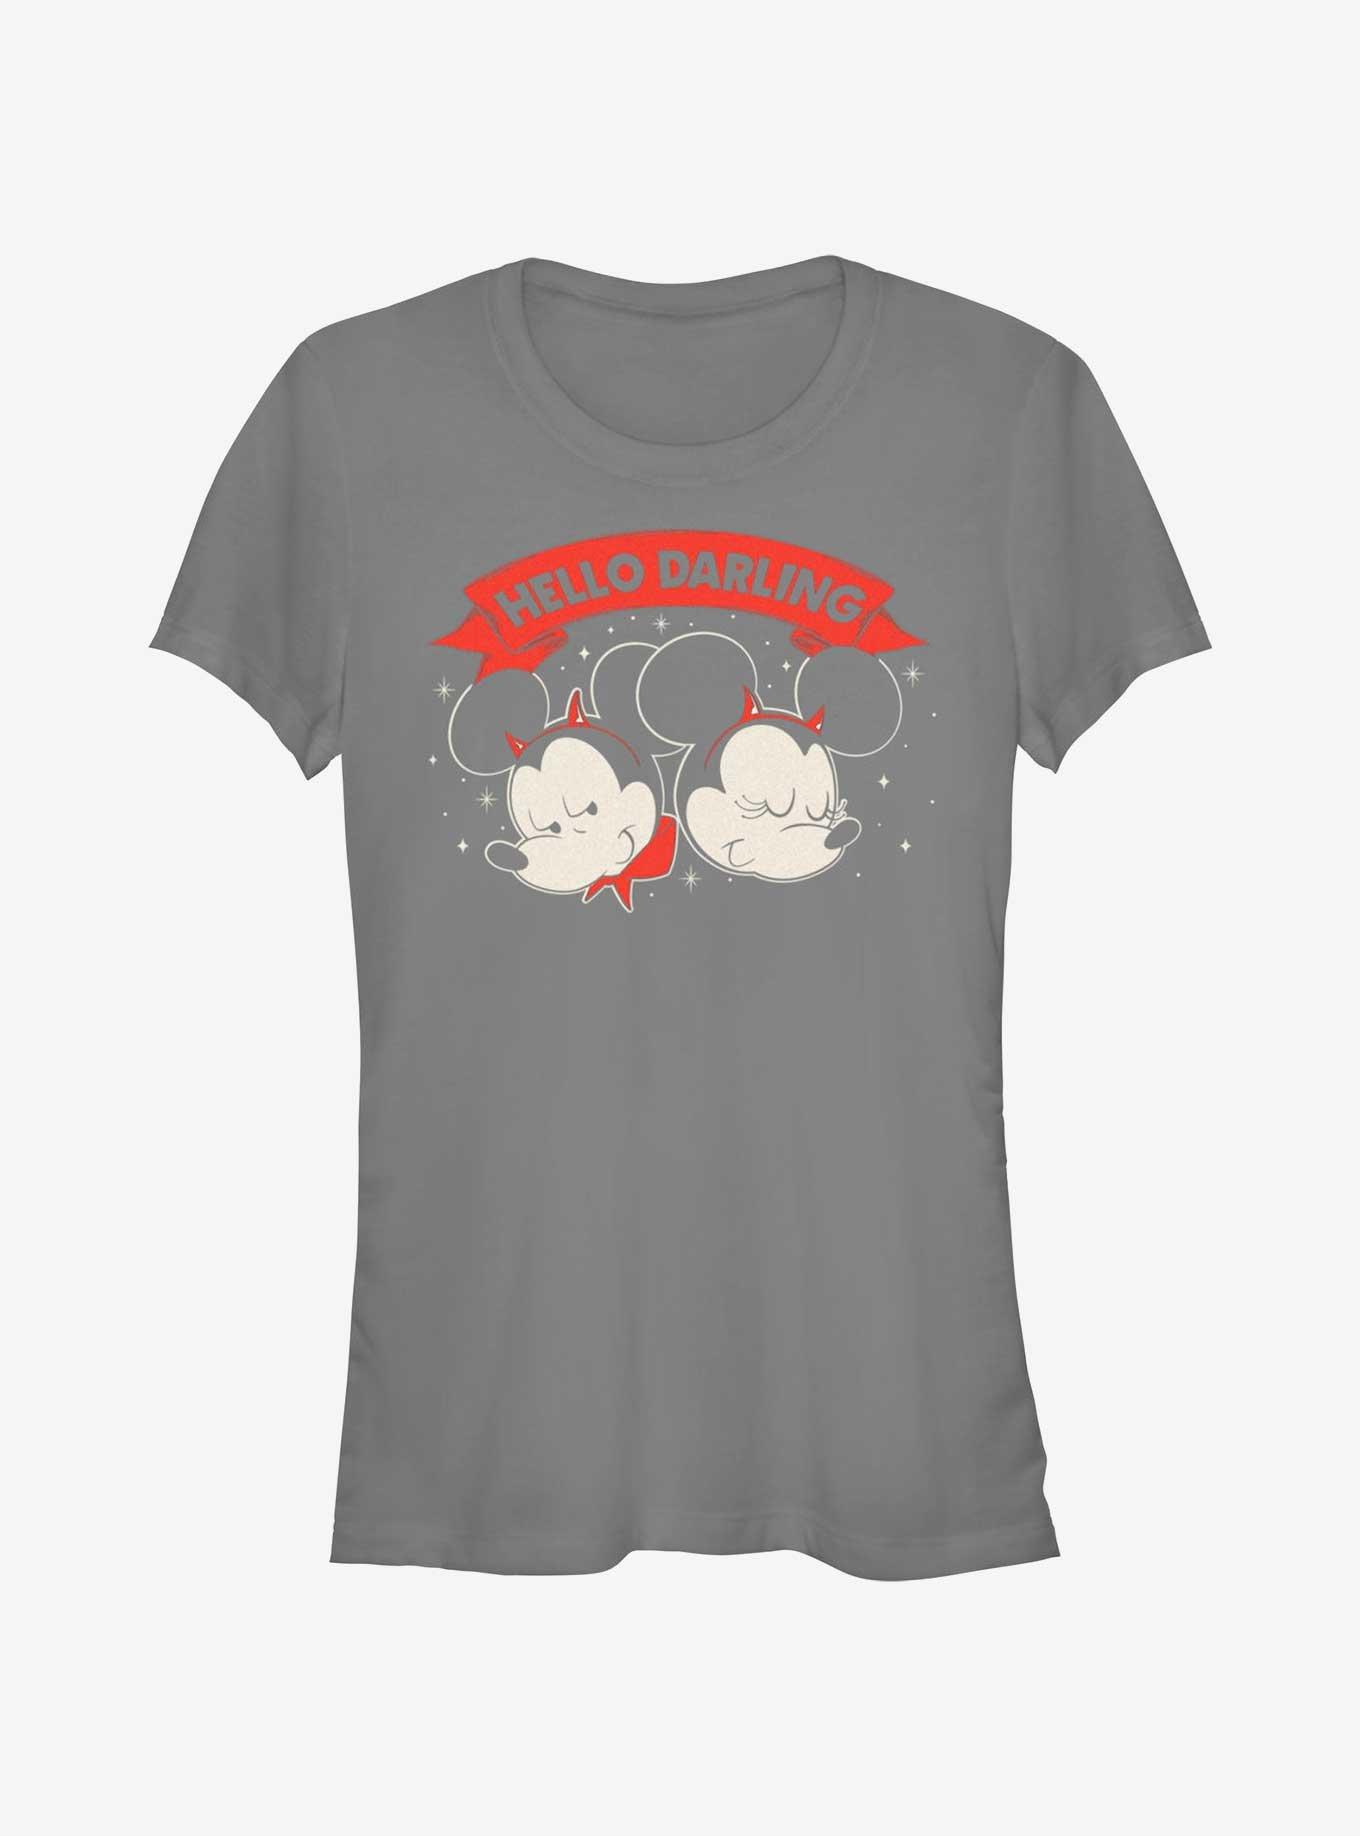 Disney Mickey Mouse & Minnie Mouse Hello Darling Girls T-Shirt, CHARCOAL, hi-res